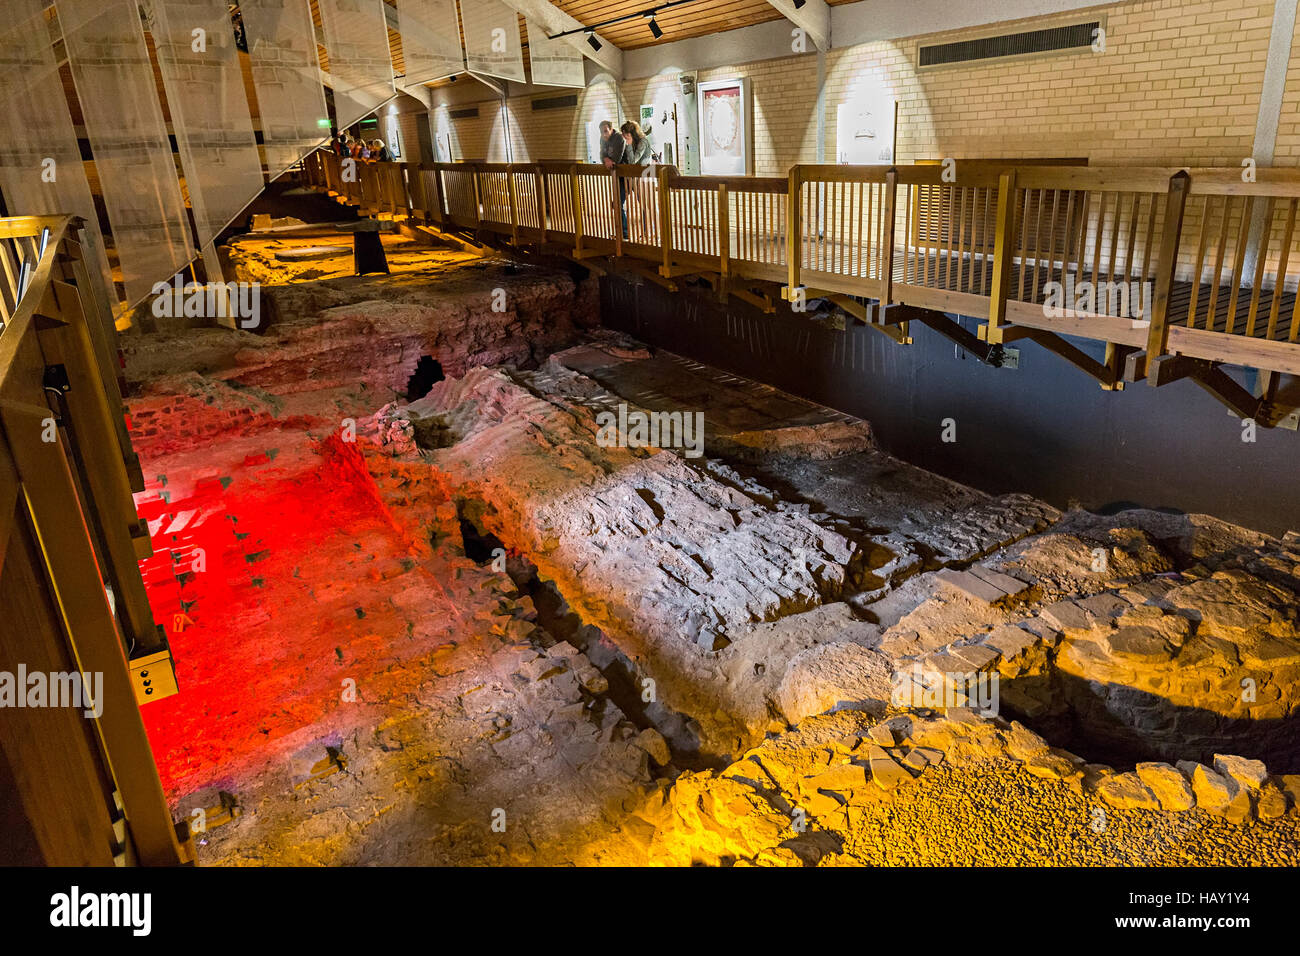 Floor remains of bath house in Roman building in museum, Caerleon, Wales, UK Stock Photo